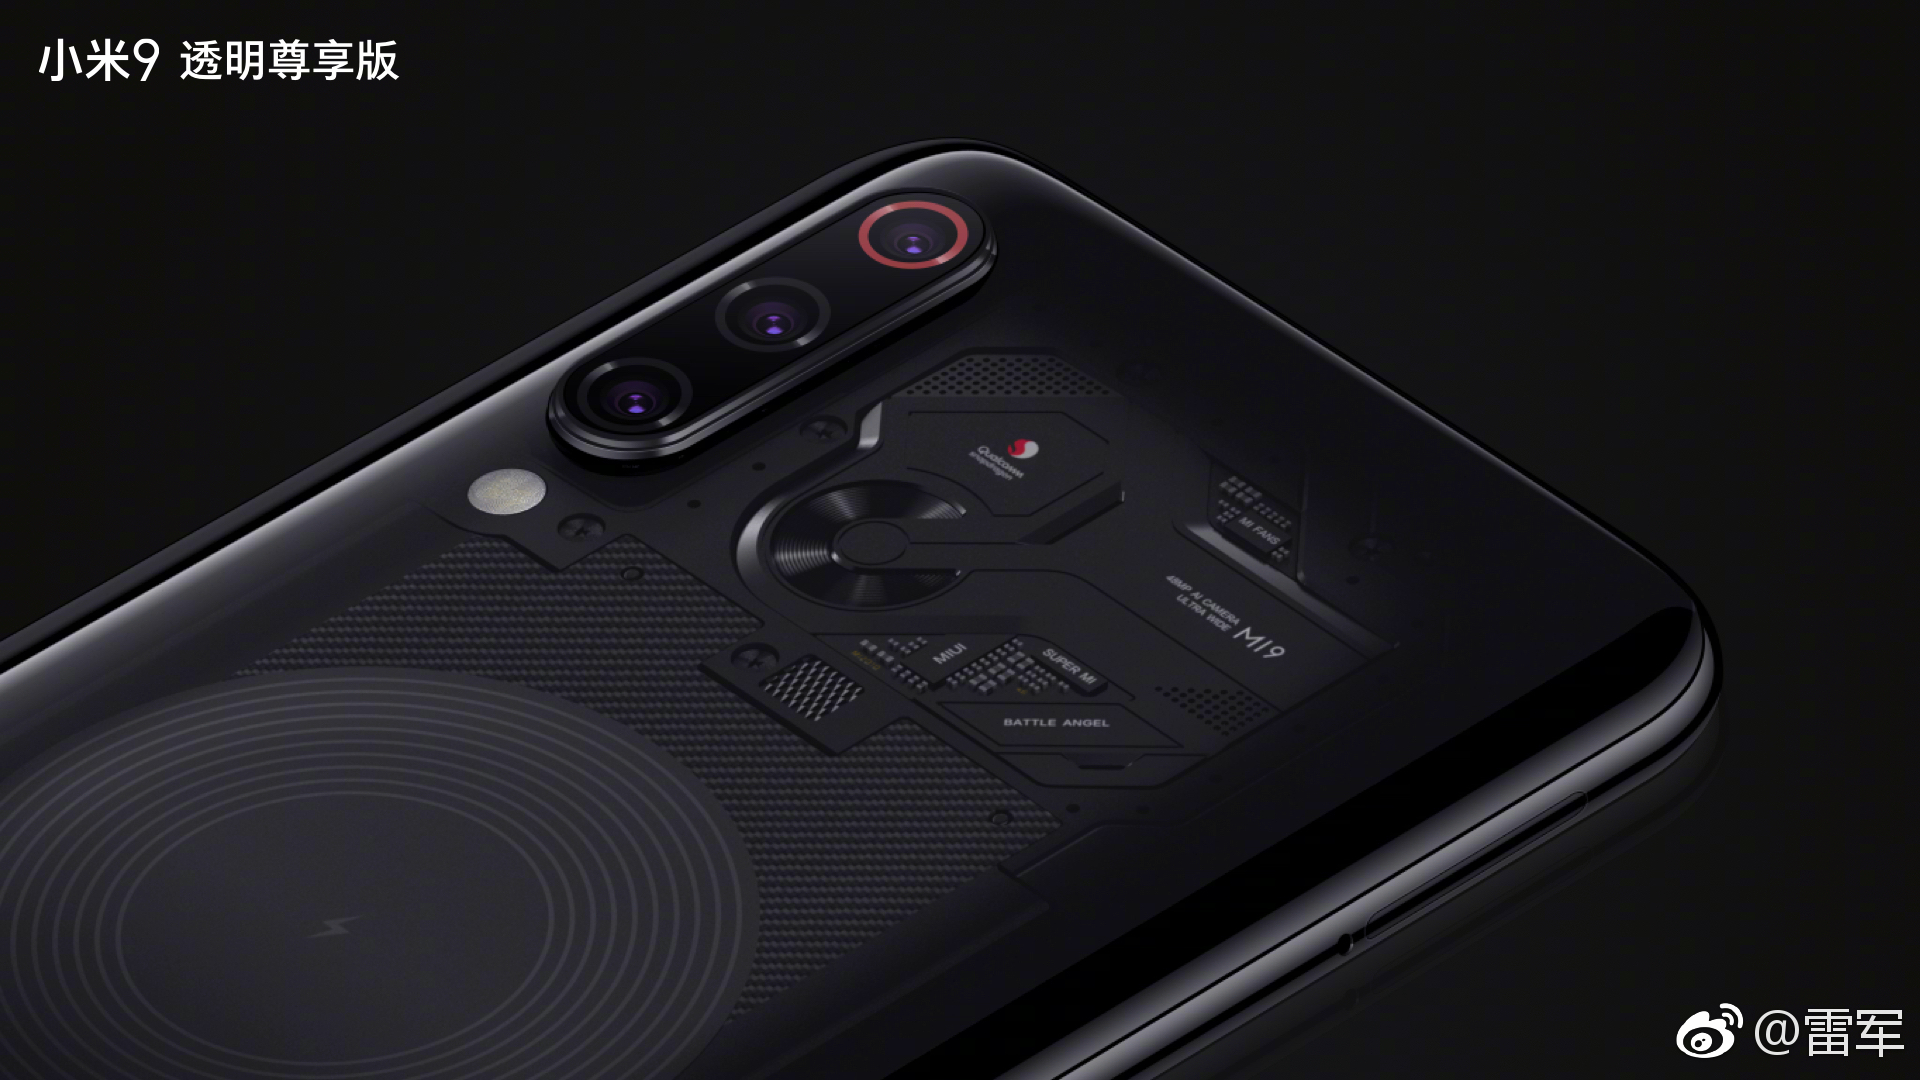 Xiaomi offers increased transparency with transparent Mi 9 